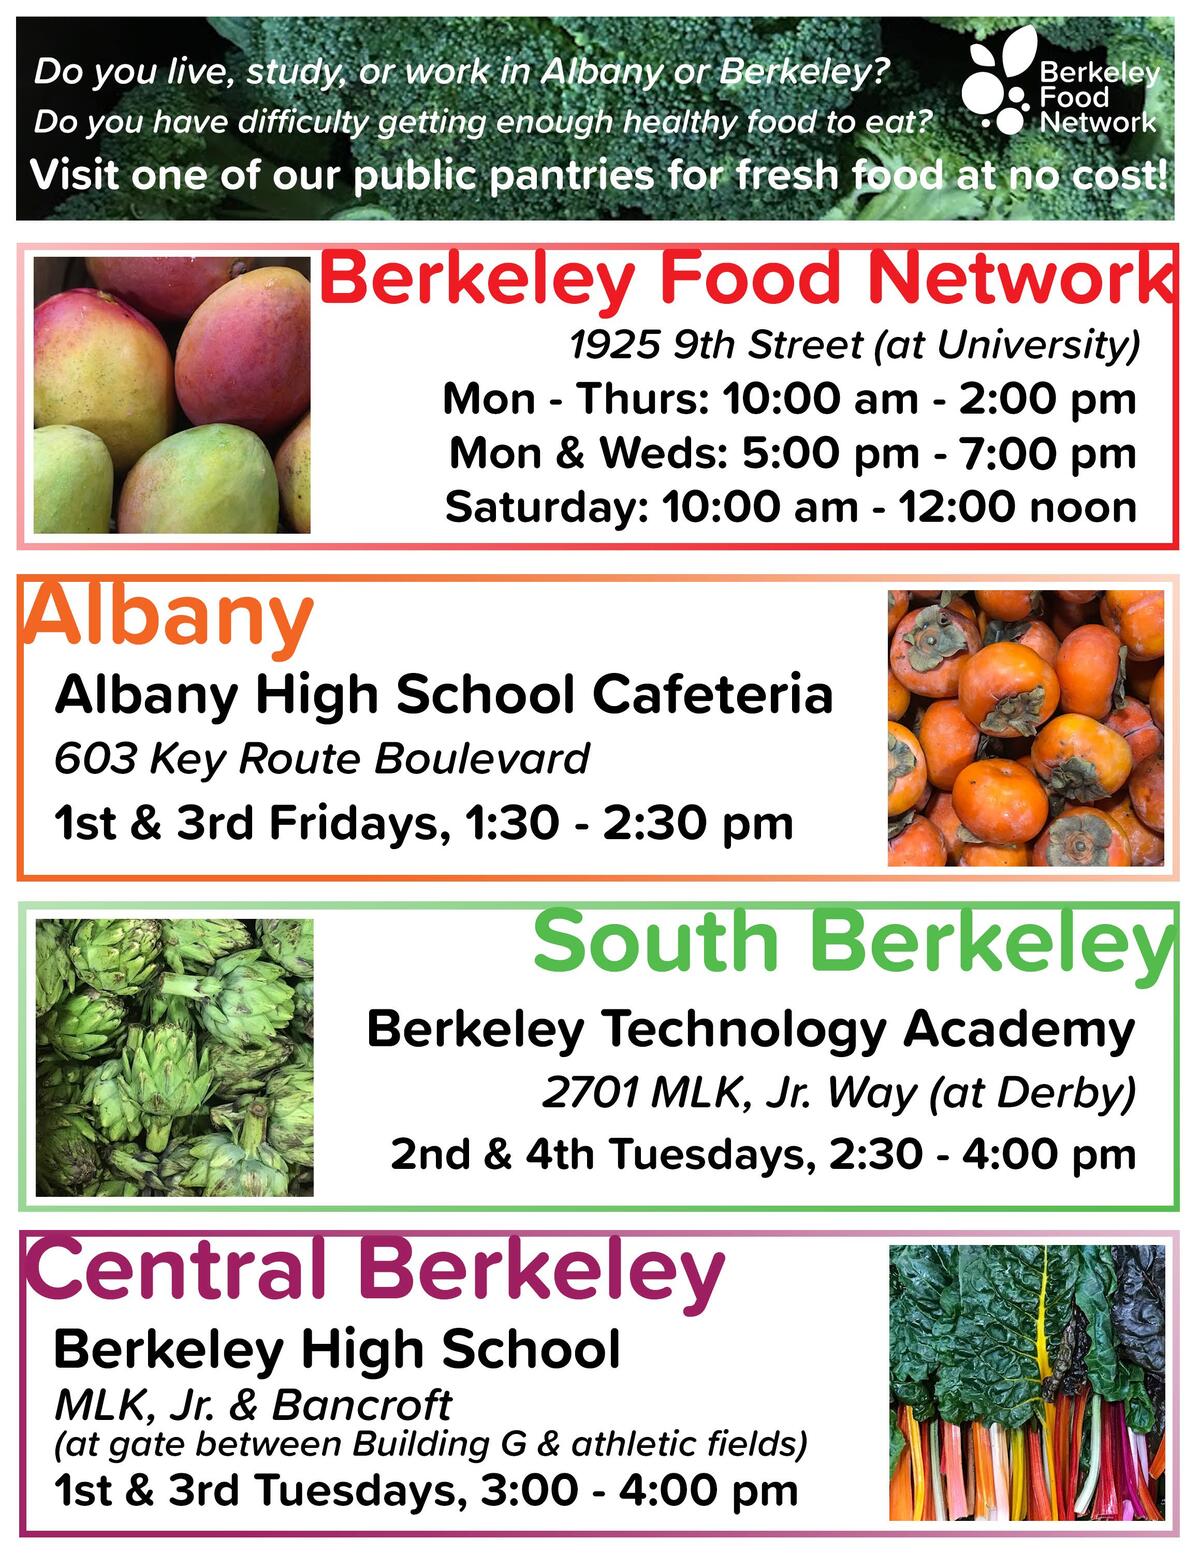 Do you live, study, or work in Albany or Berkeley? Visit our public pantries for free fresh food!